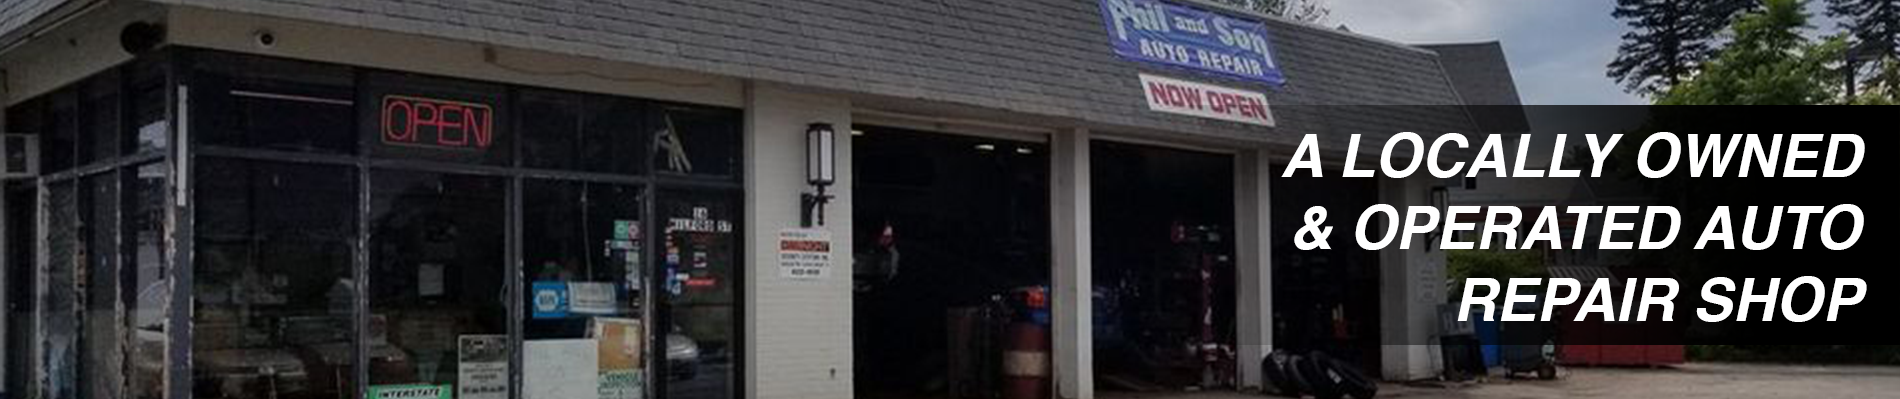 A Locally Owned and Operated Auto Repair Shop